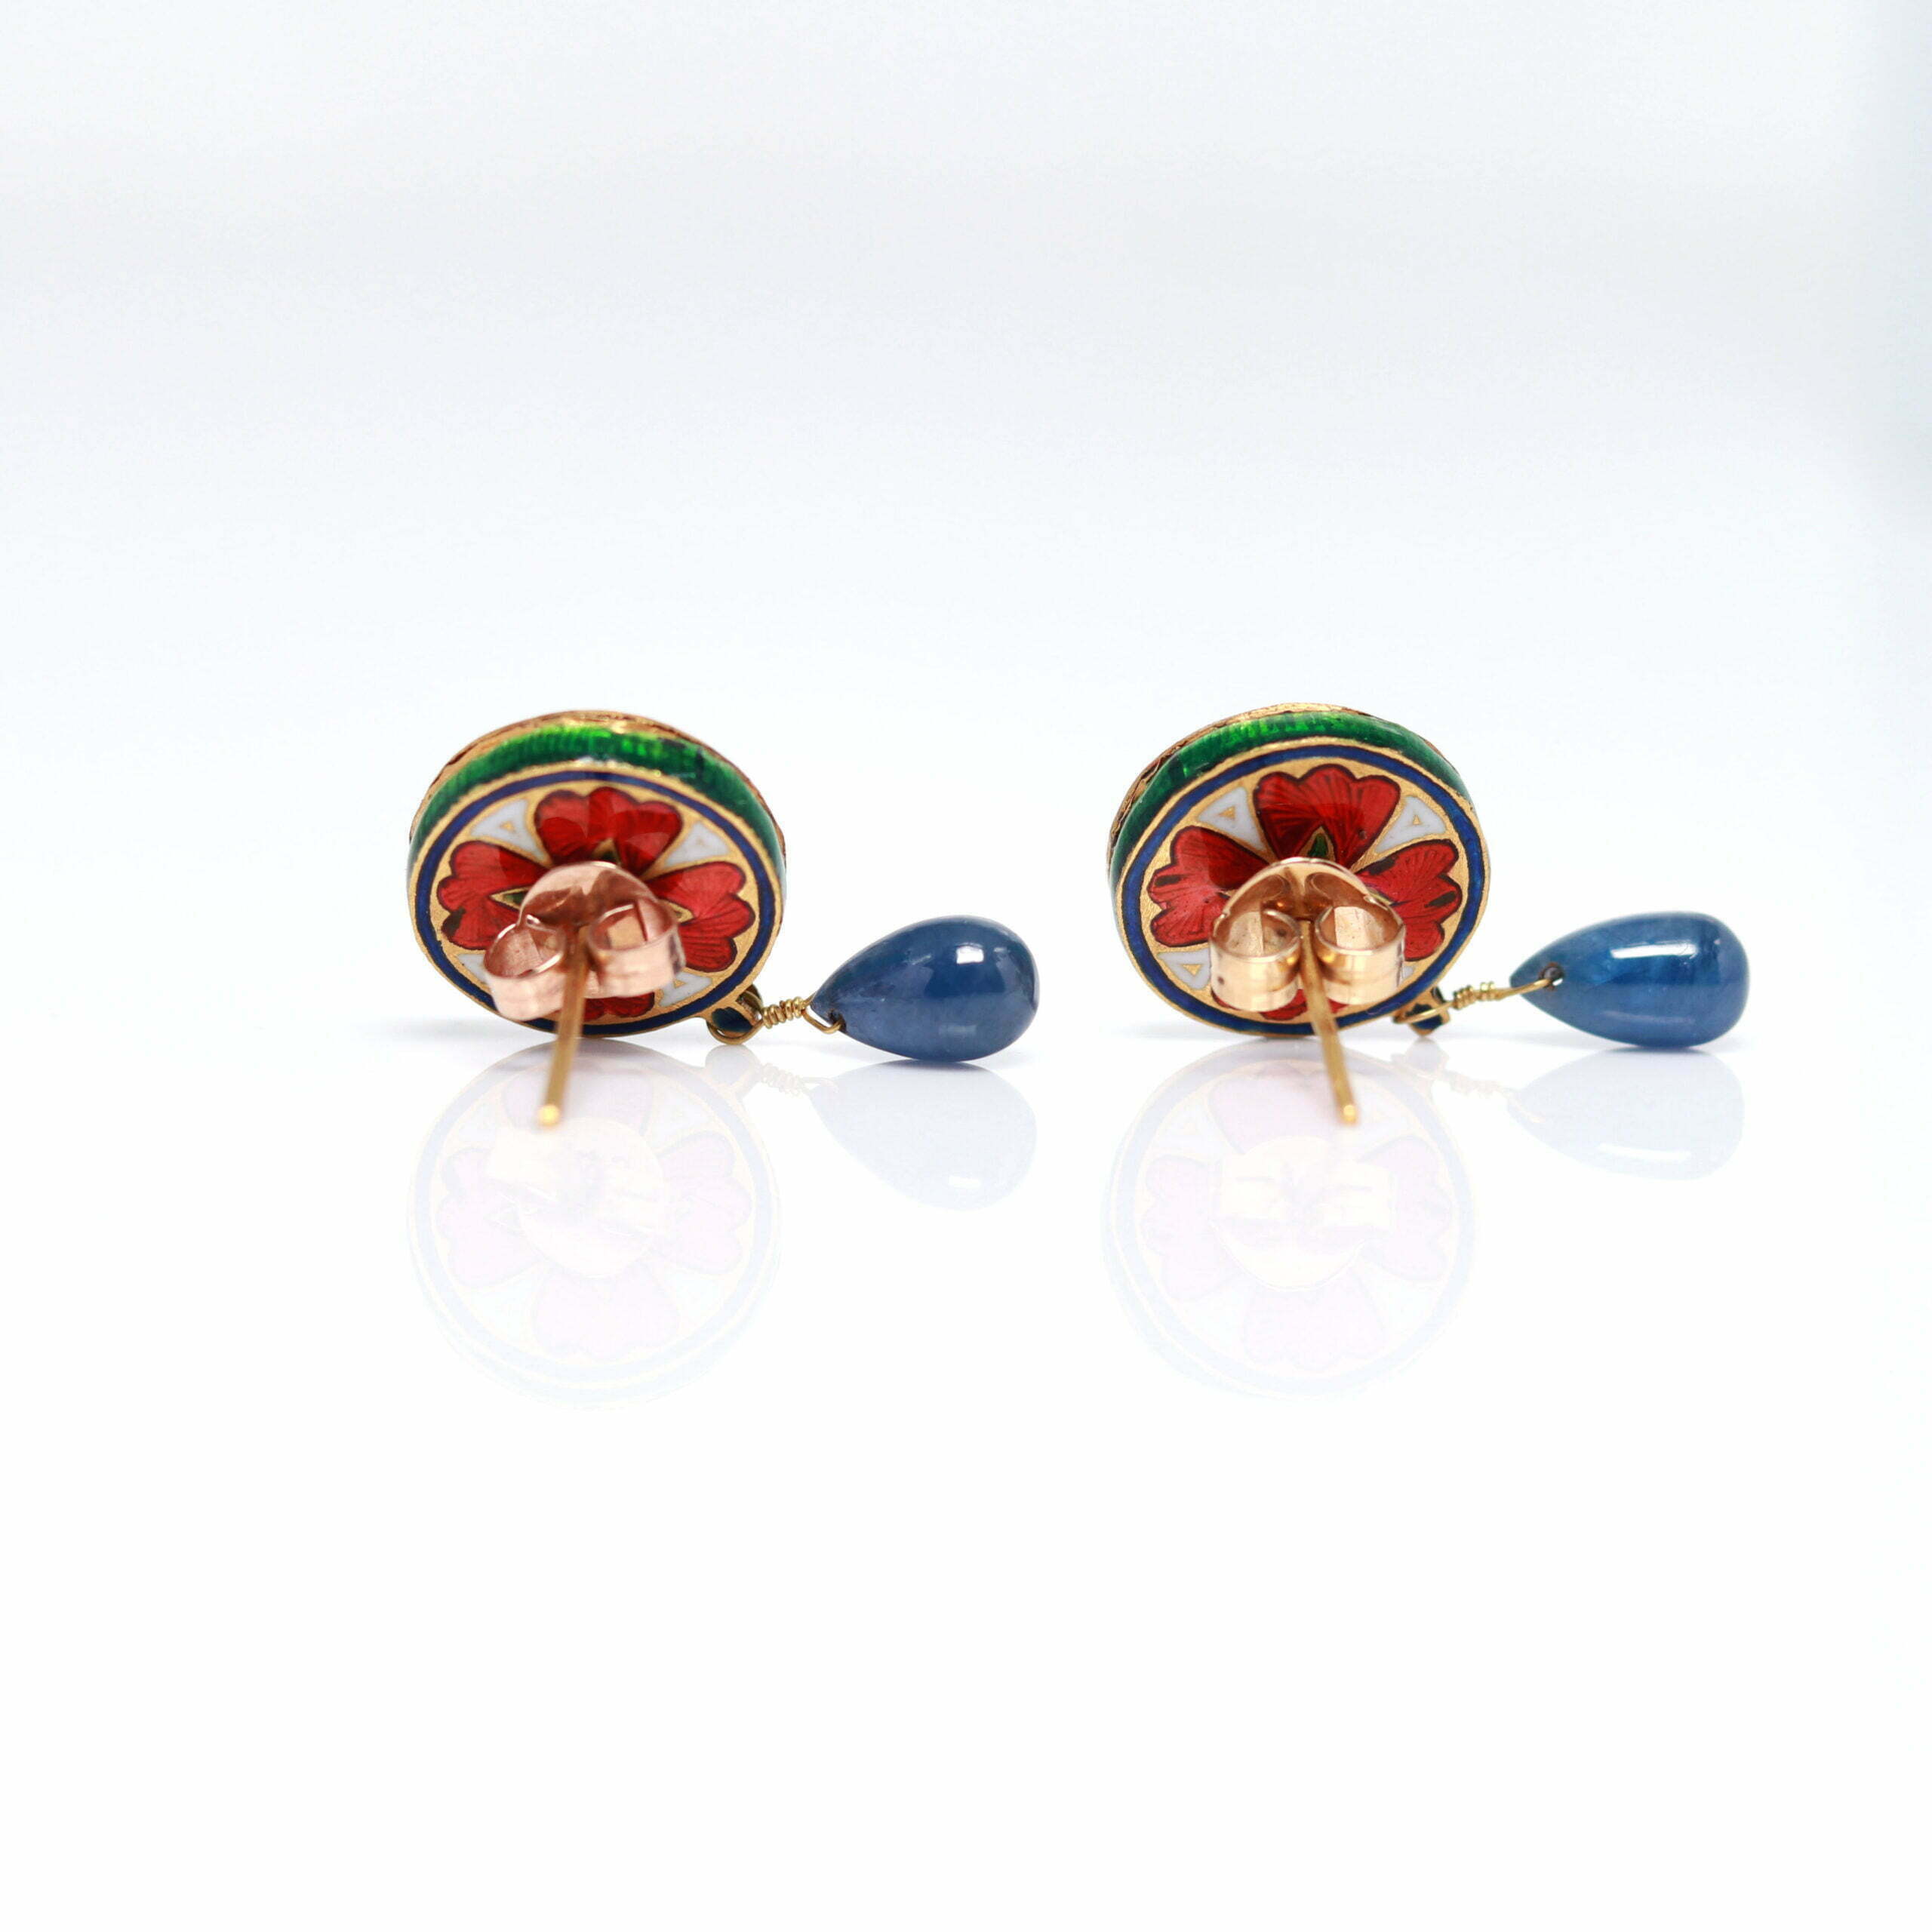 Silver & enamel ear hooks handmade by Laura Haszard - available after -  Craft NSW